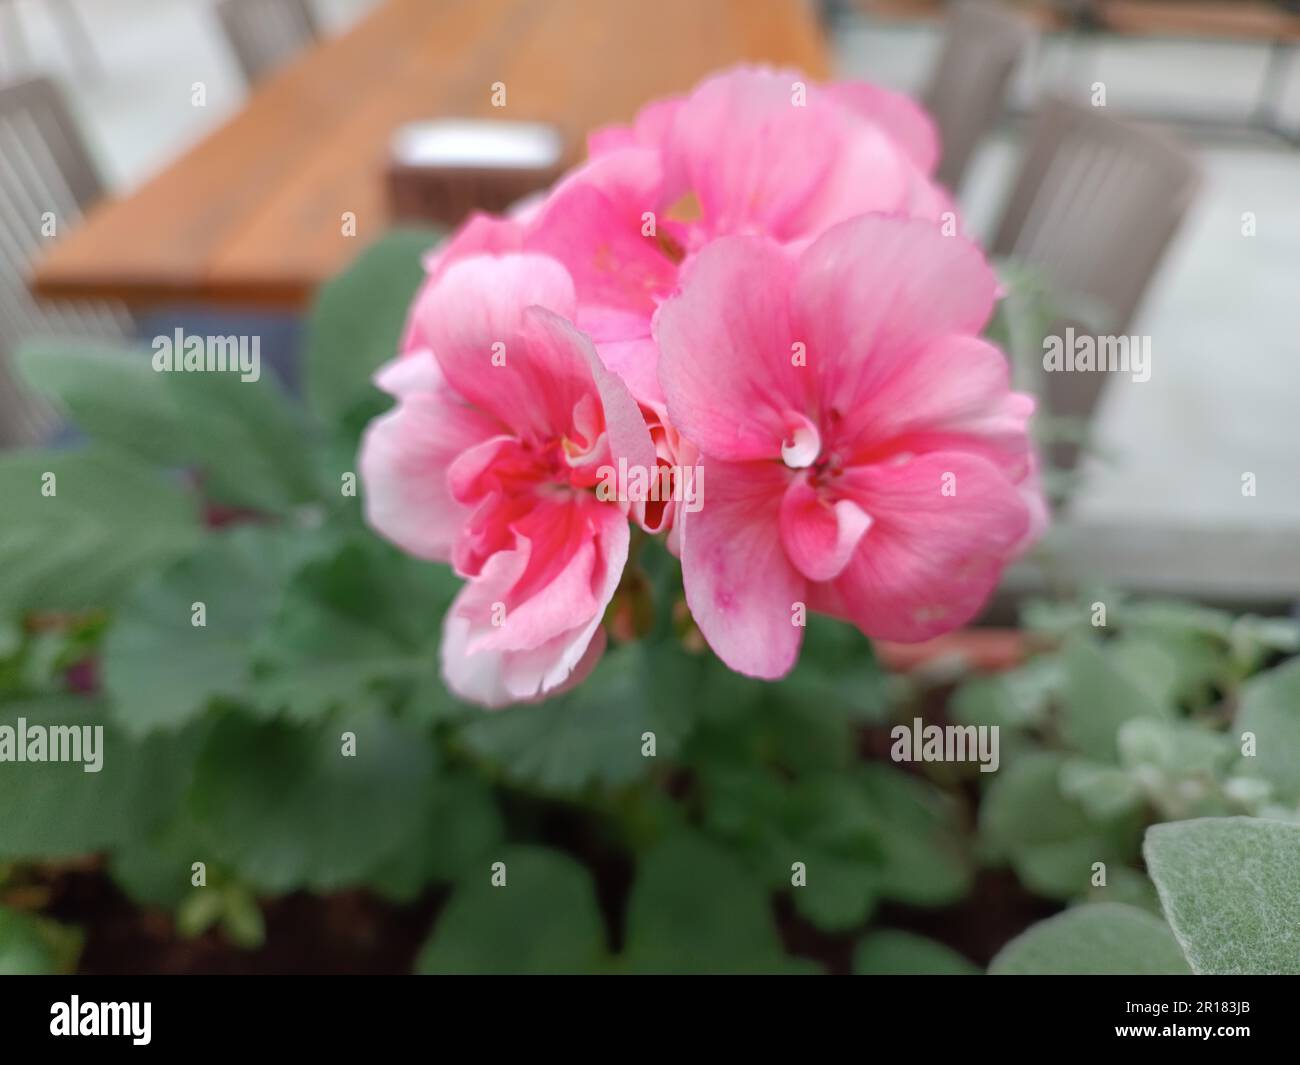 Pink potted flower. Pink flower background, selective focus. Stock Photo